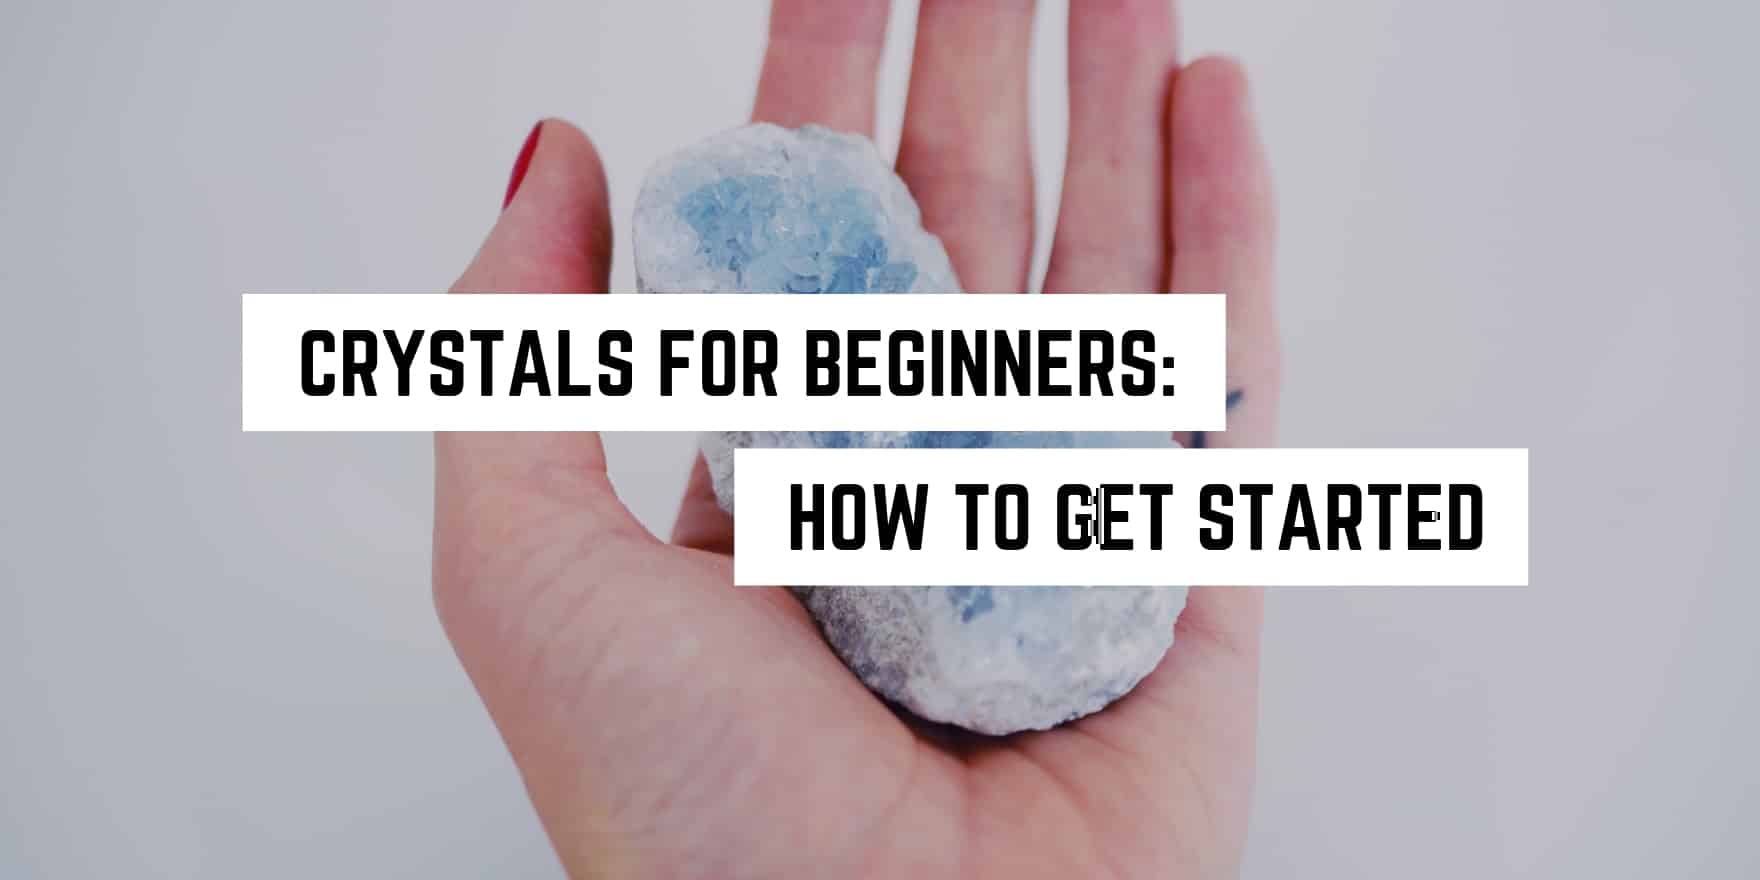 Crystals for Beginners: How to Get Started